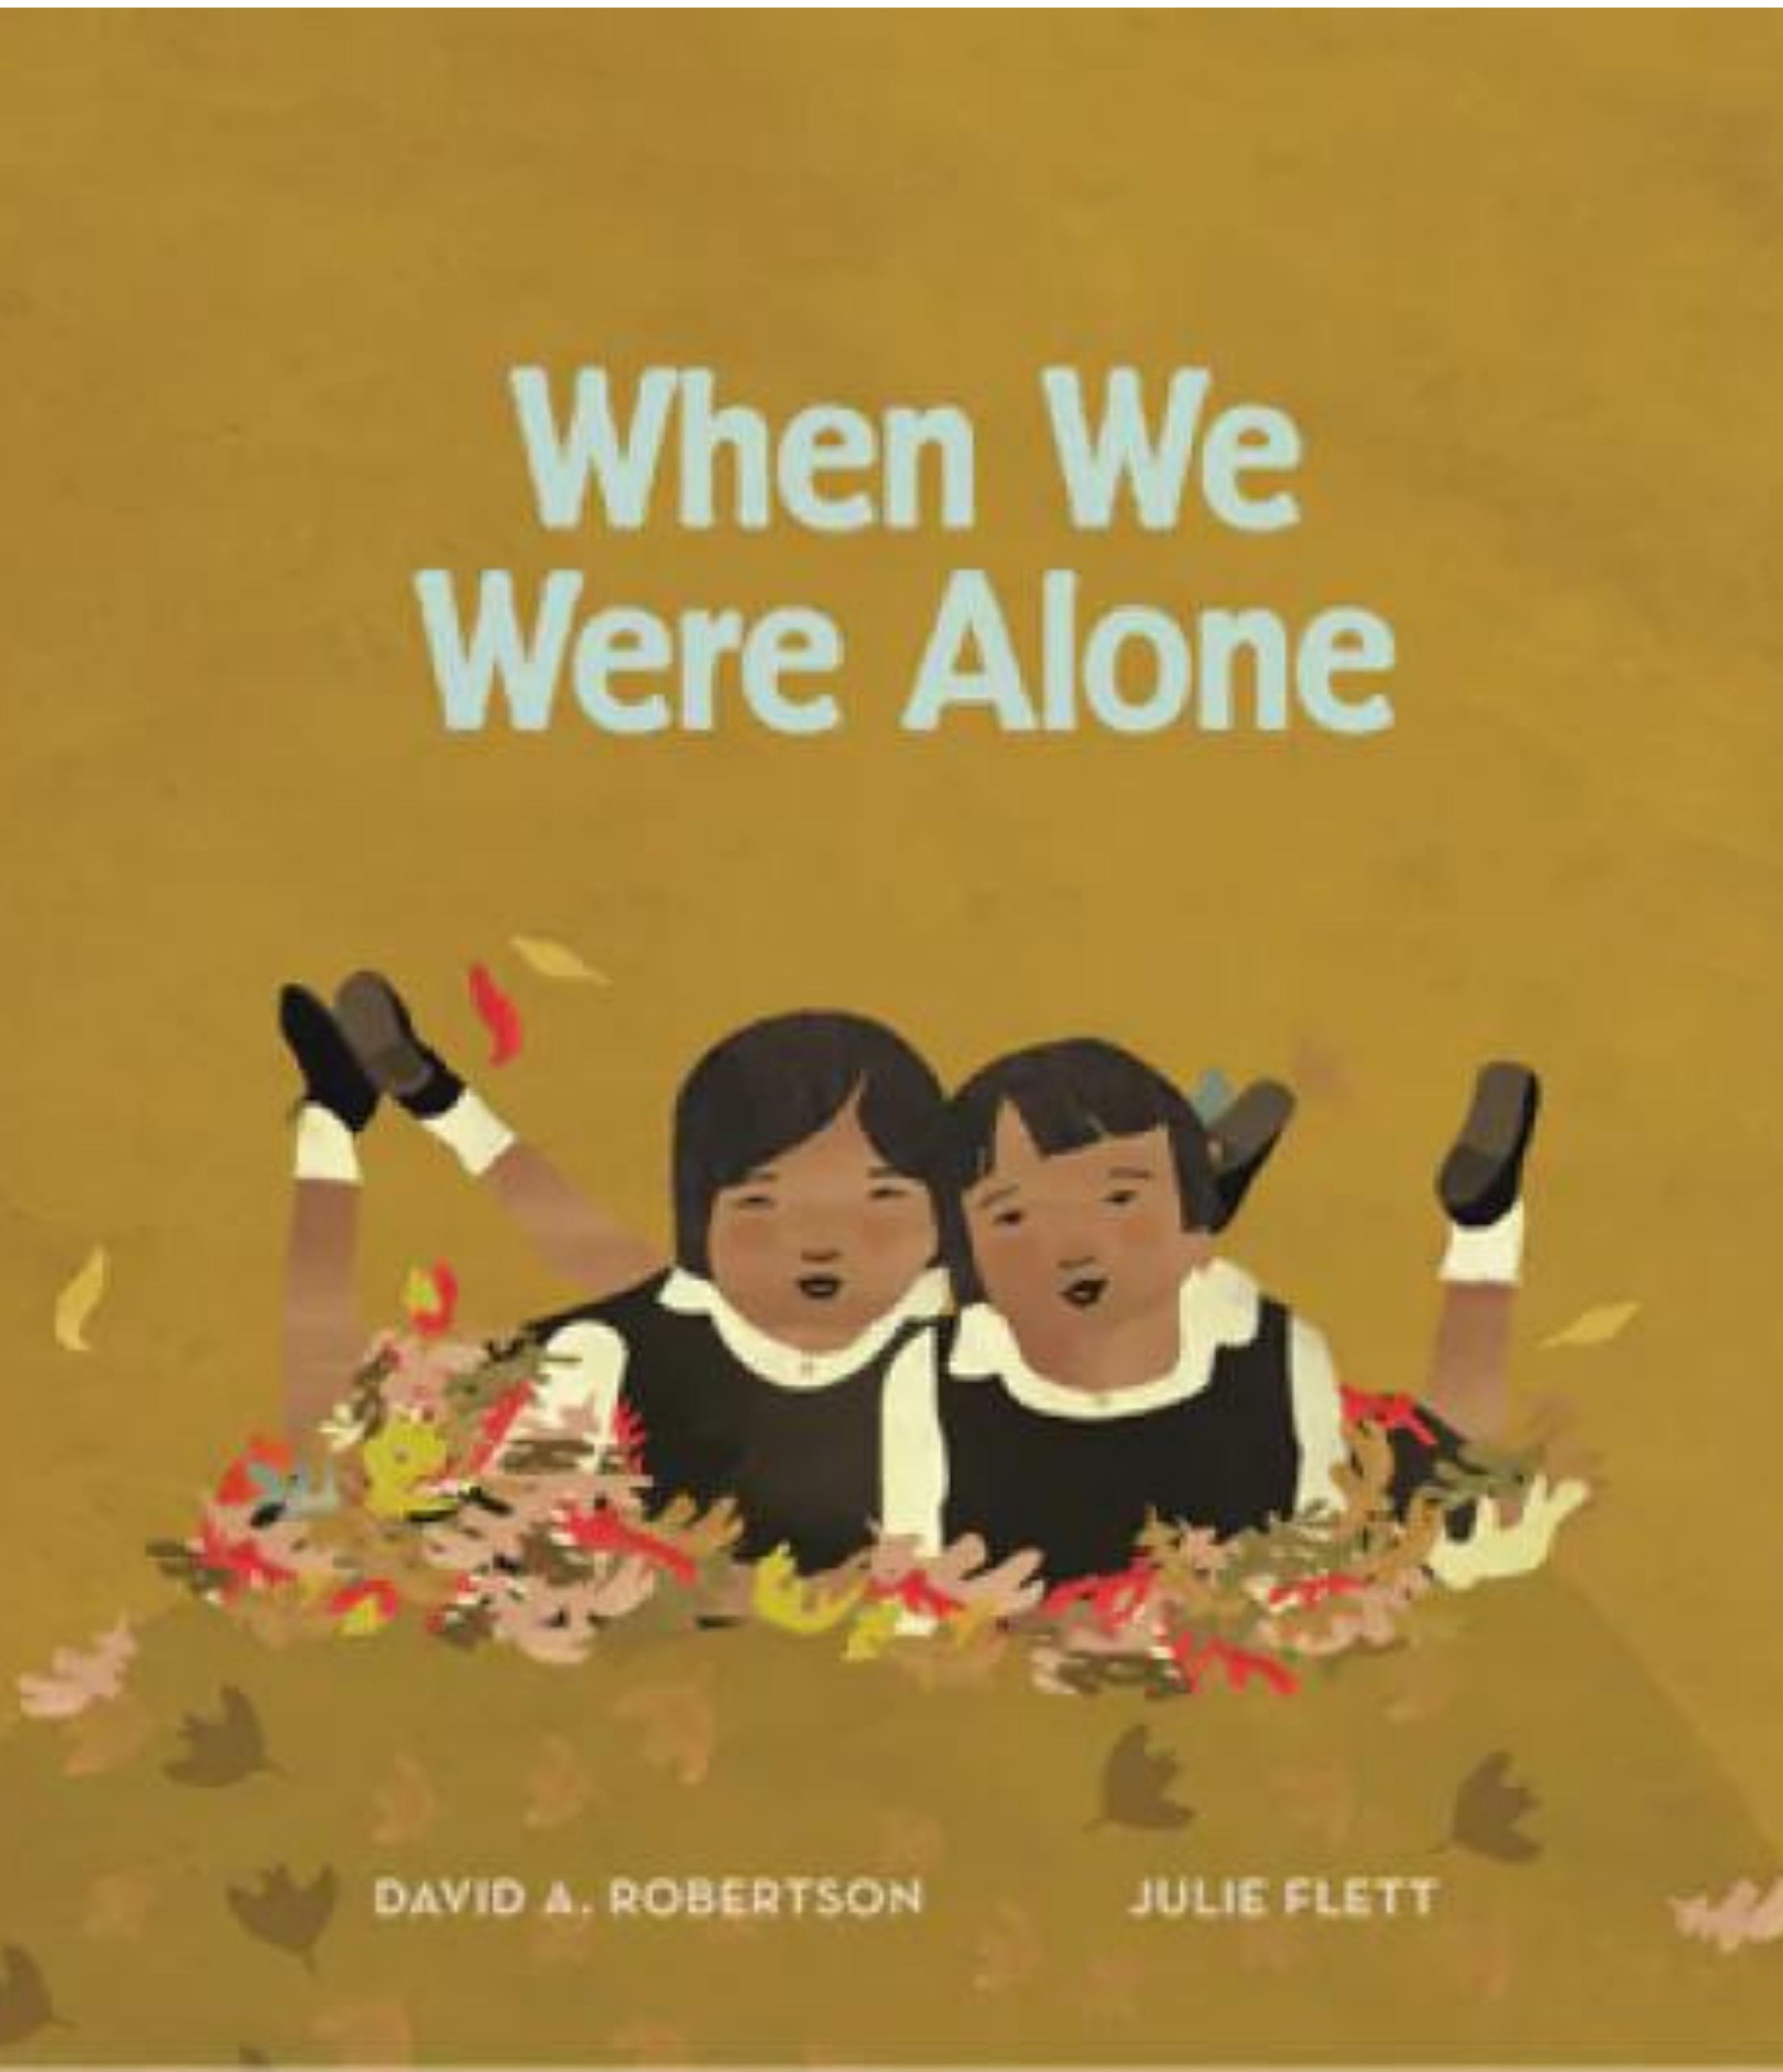 book cover of When We Were Alone by David A. Robertson and Julie Flett